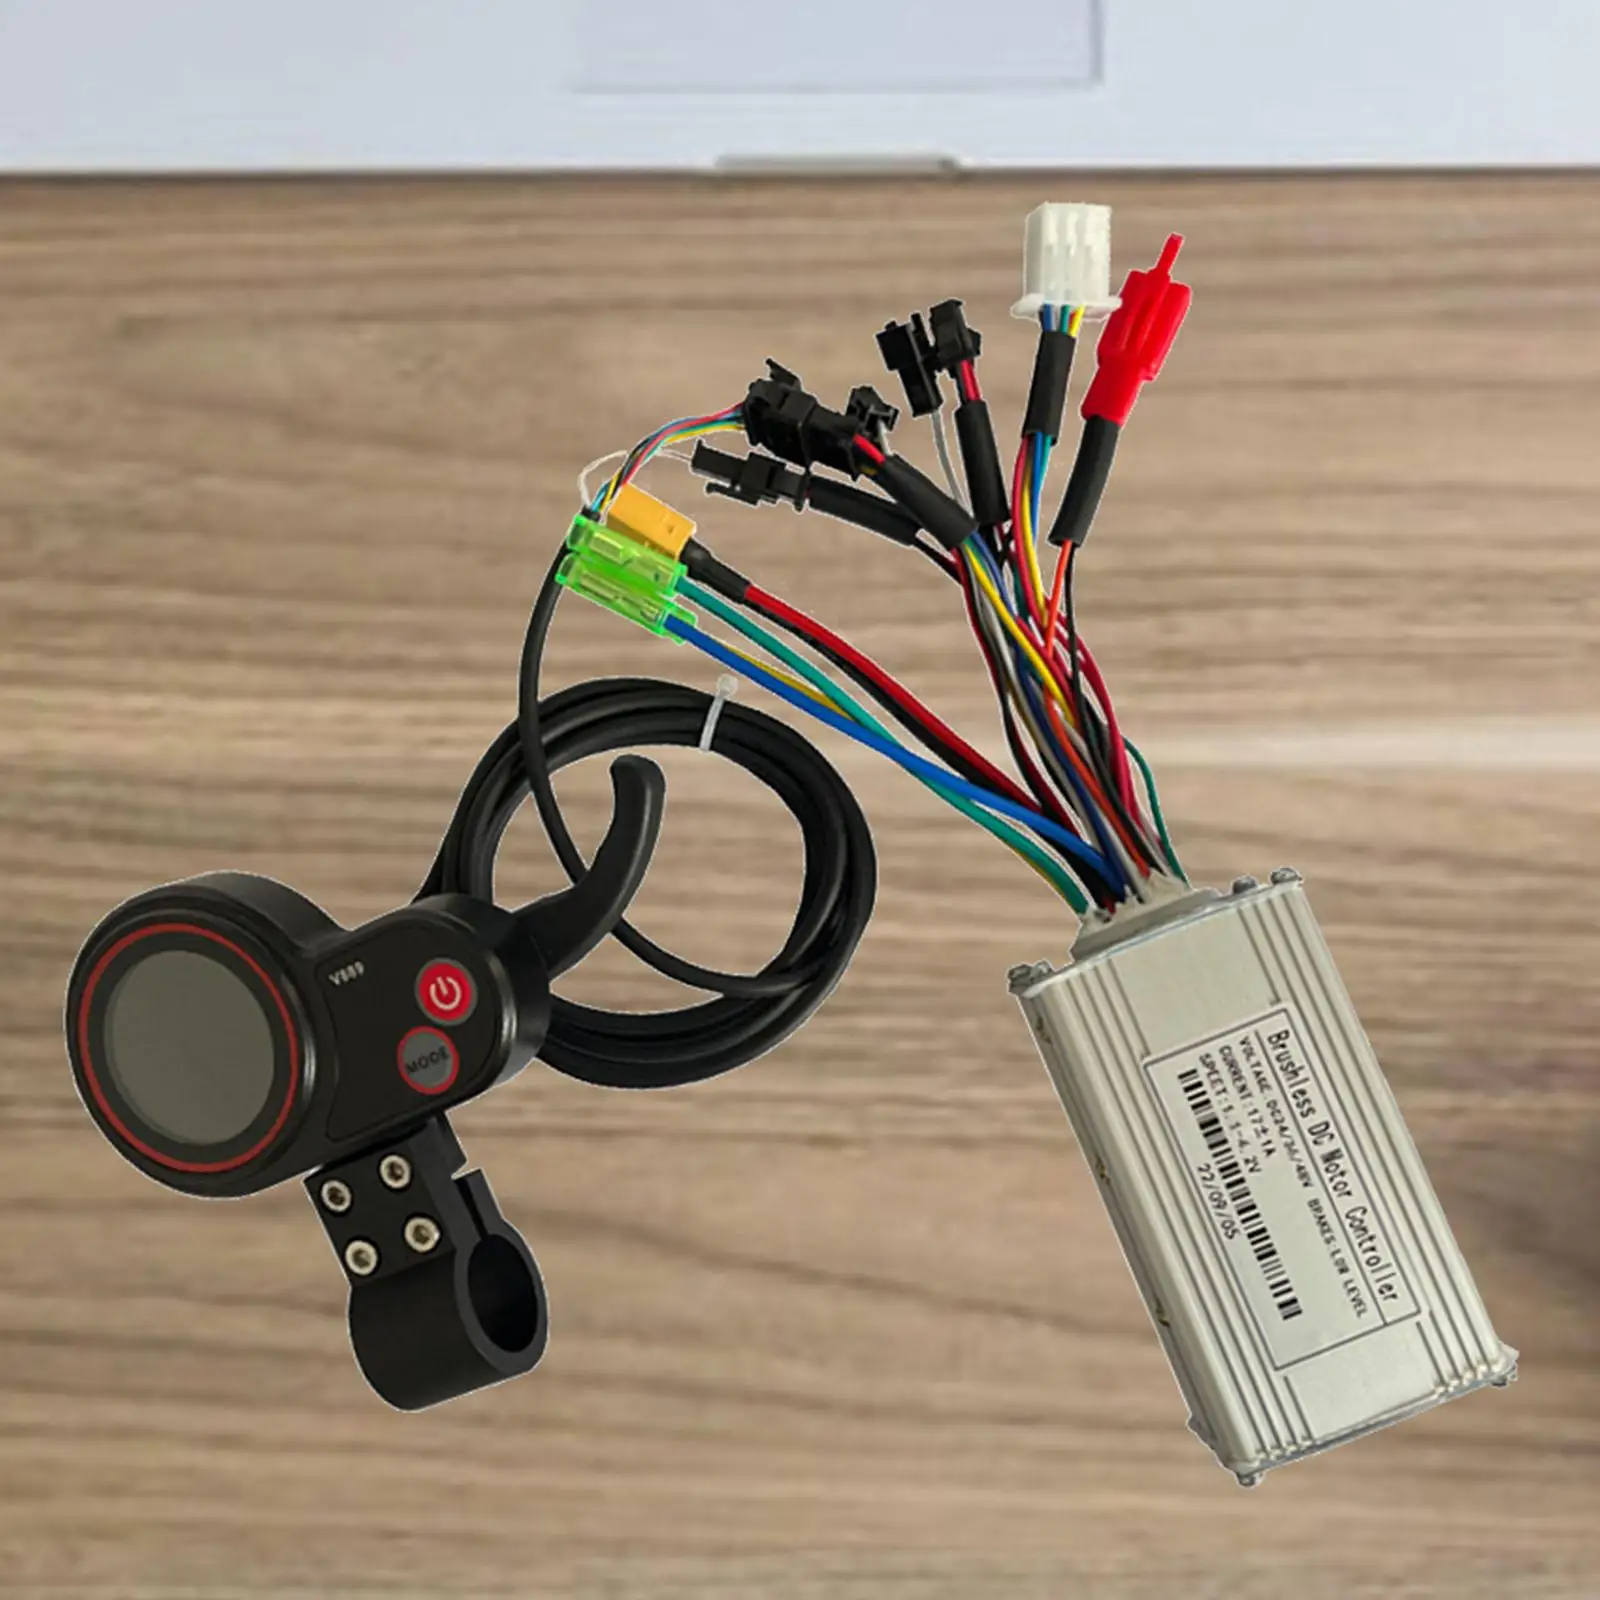 Motor Brushless Controller LCD Panel Brushless DC Controller for Electric Bicycle